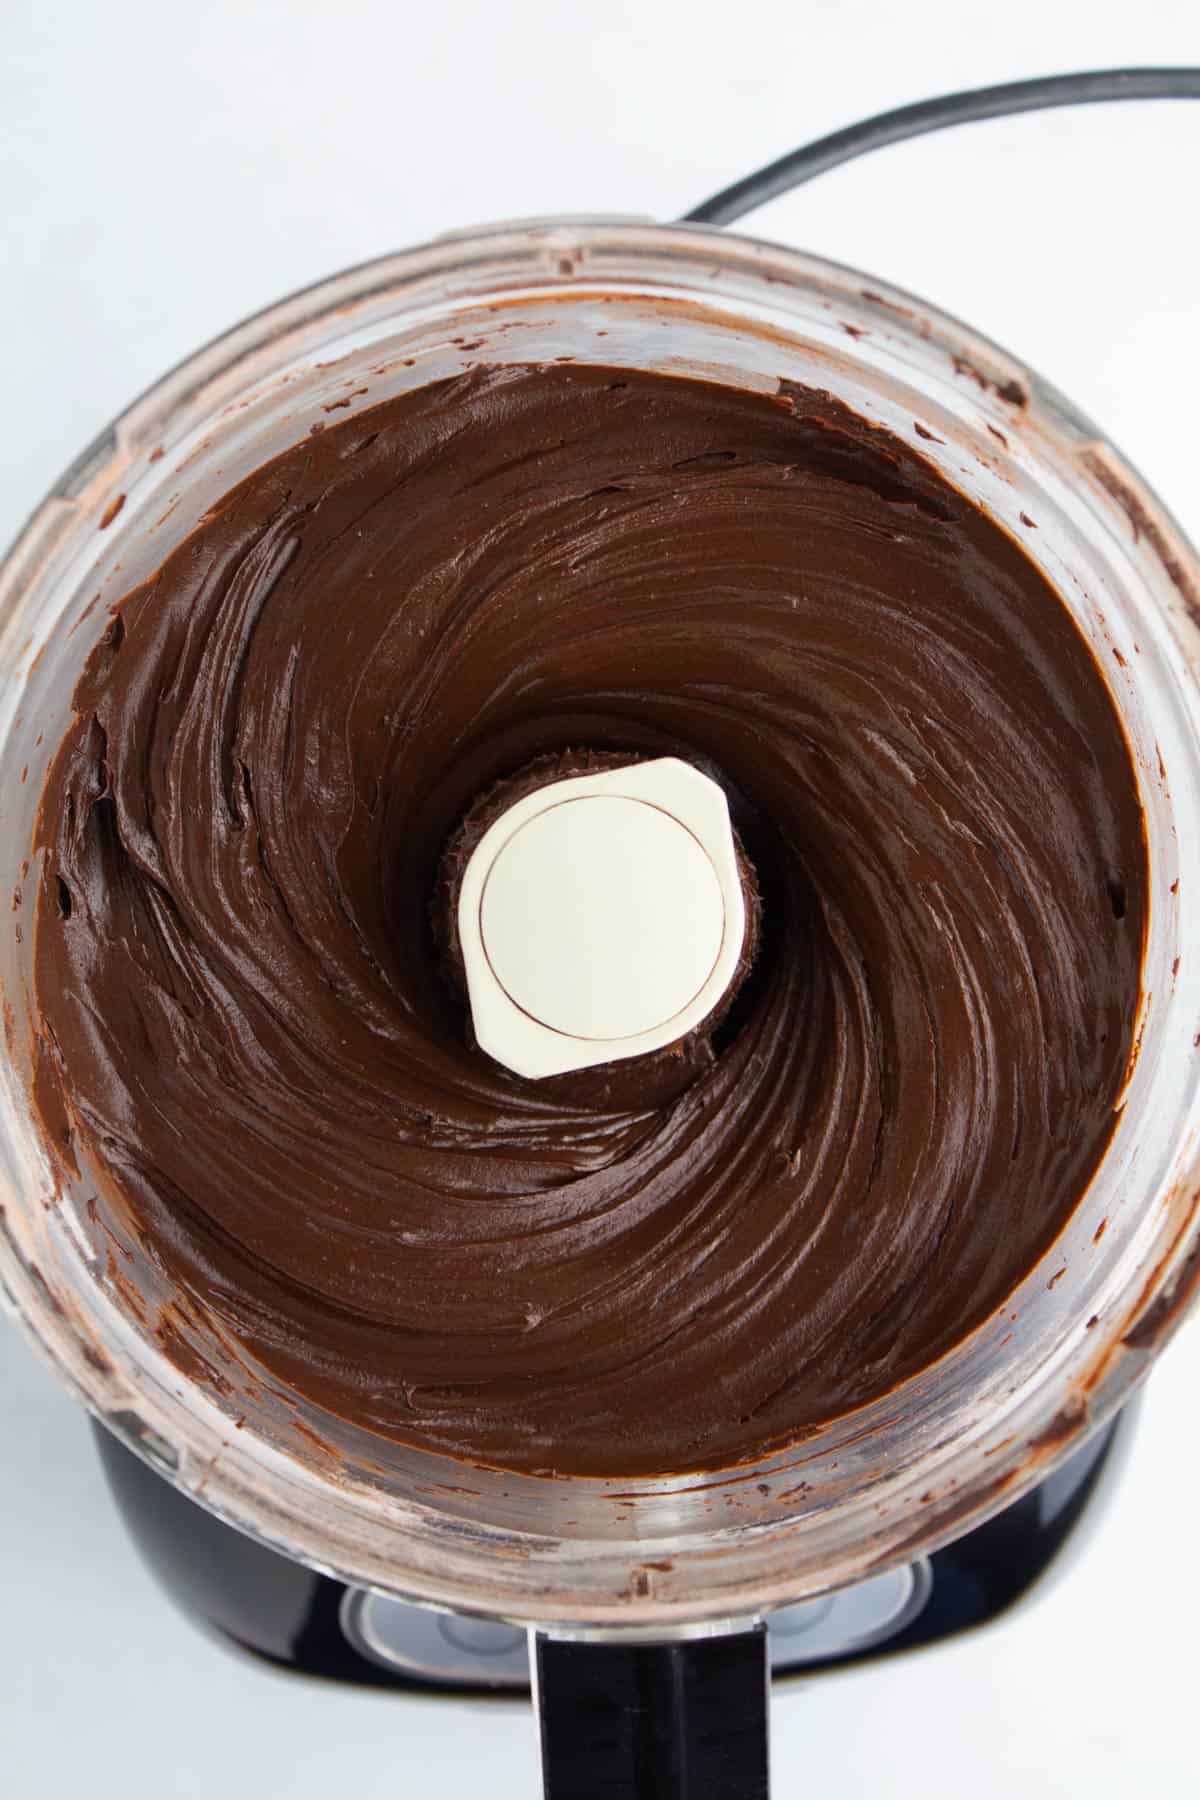 Final chocolate fudge frosting in a food processor.